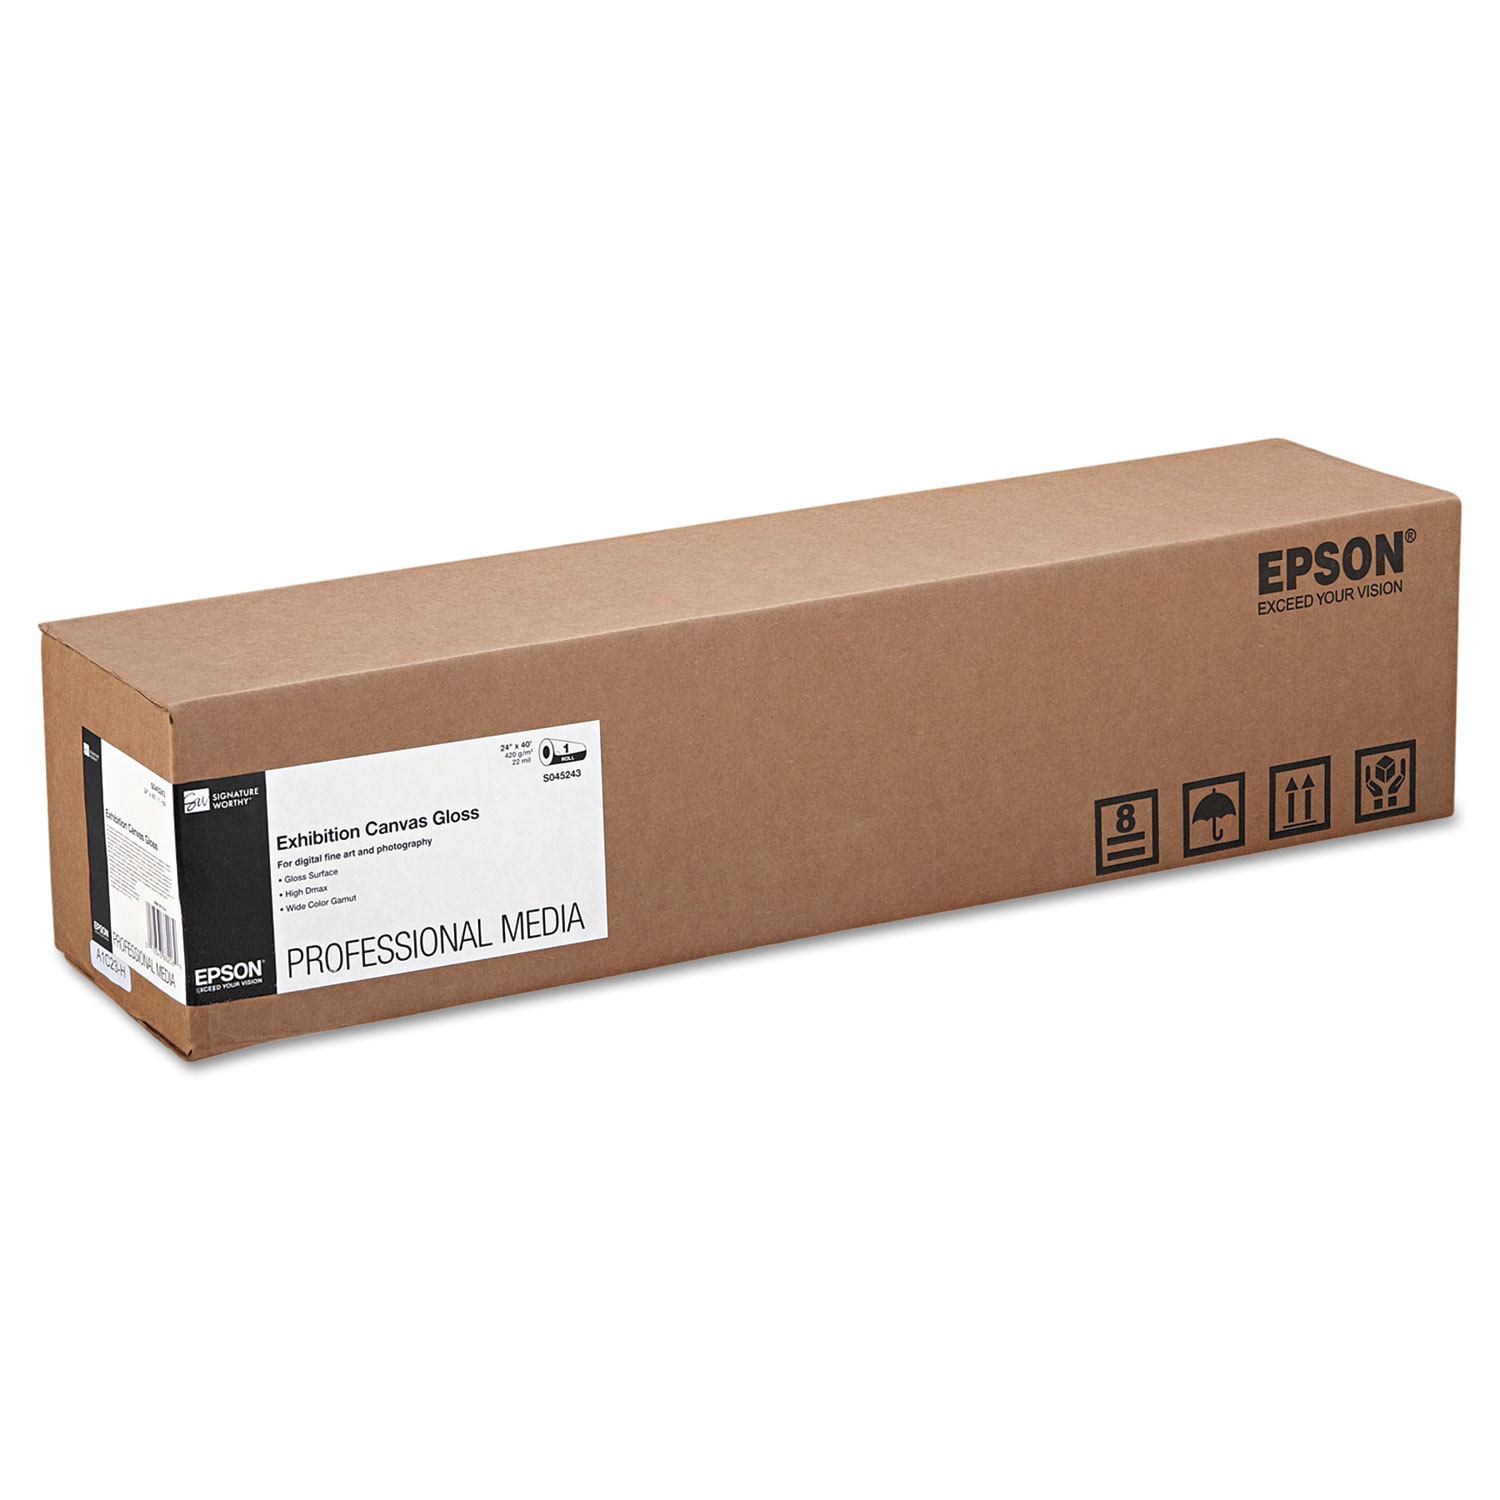  Epson S045243 Exhibition Canvas, 22 mil, 24 x 40 ft, Glossy White (EPSS045243) 